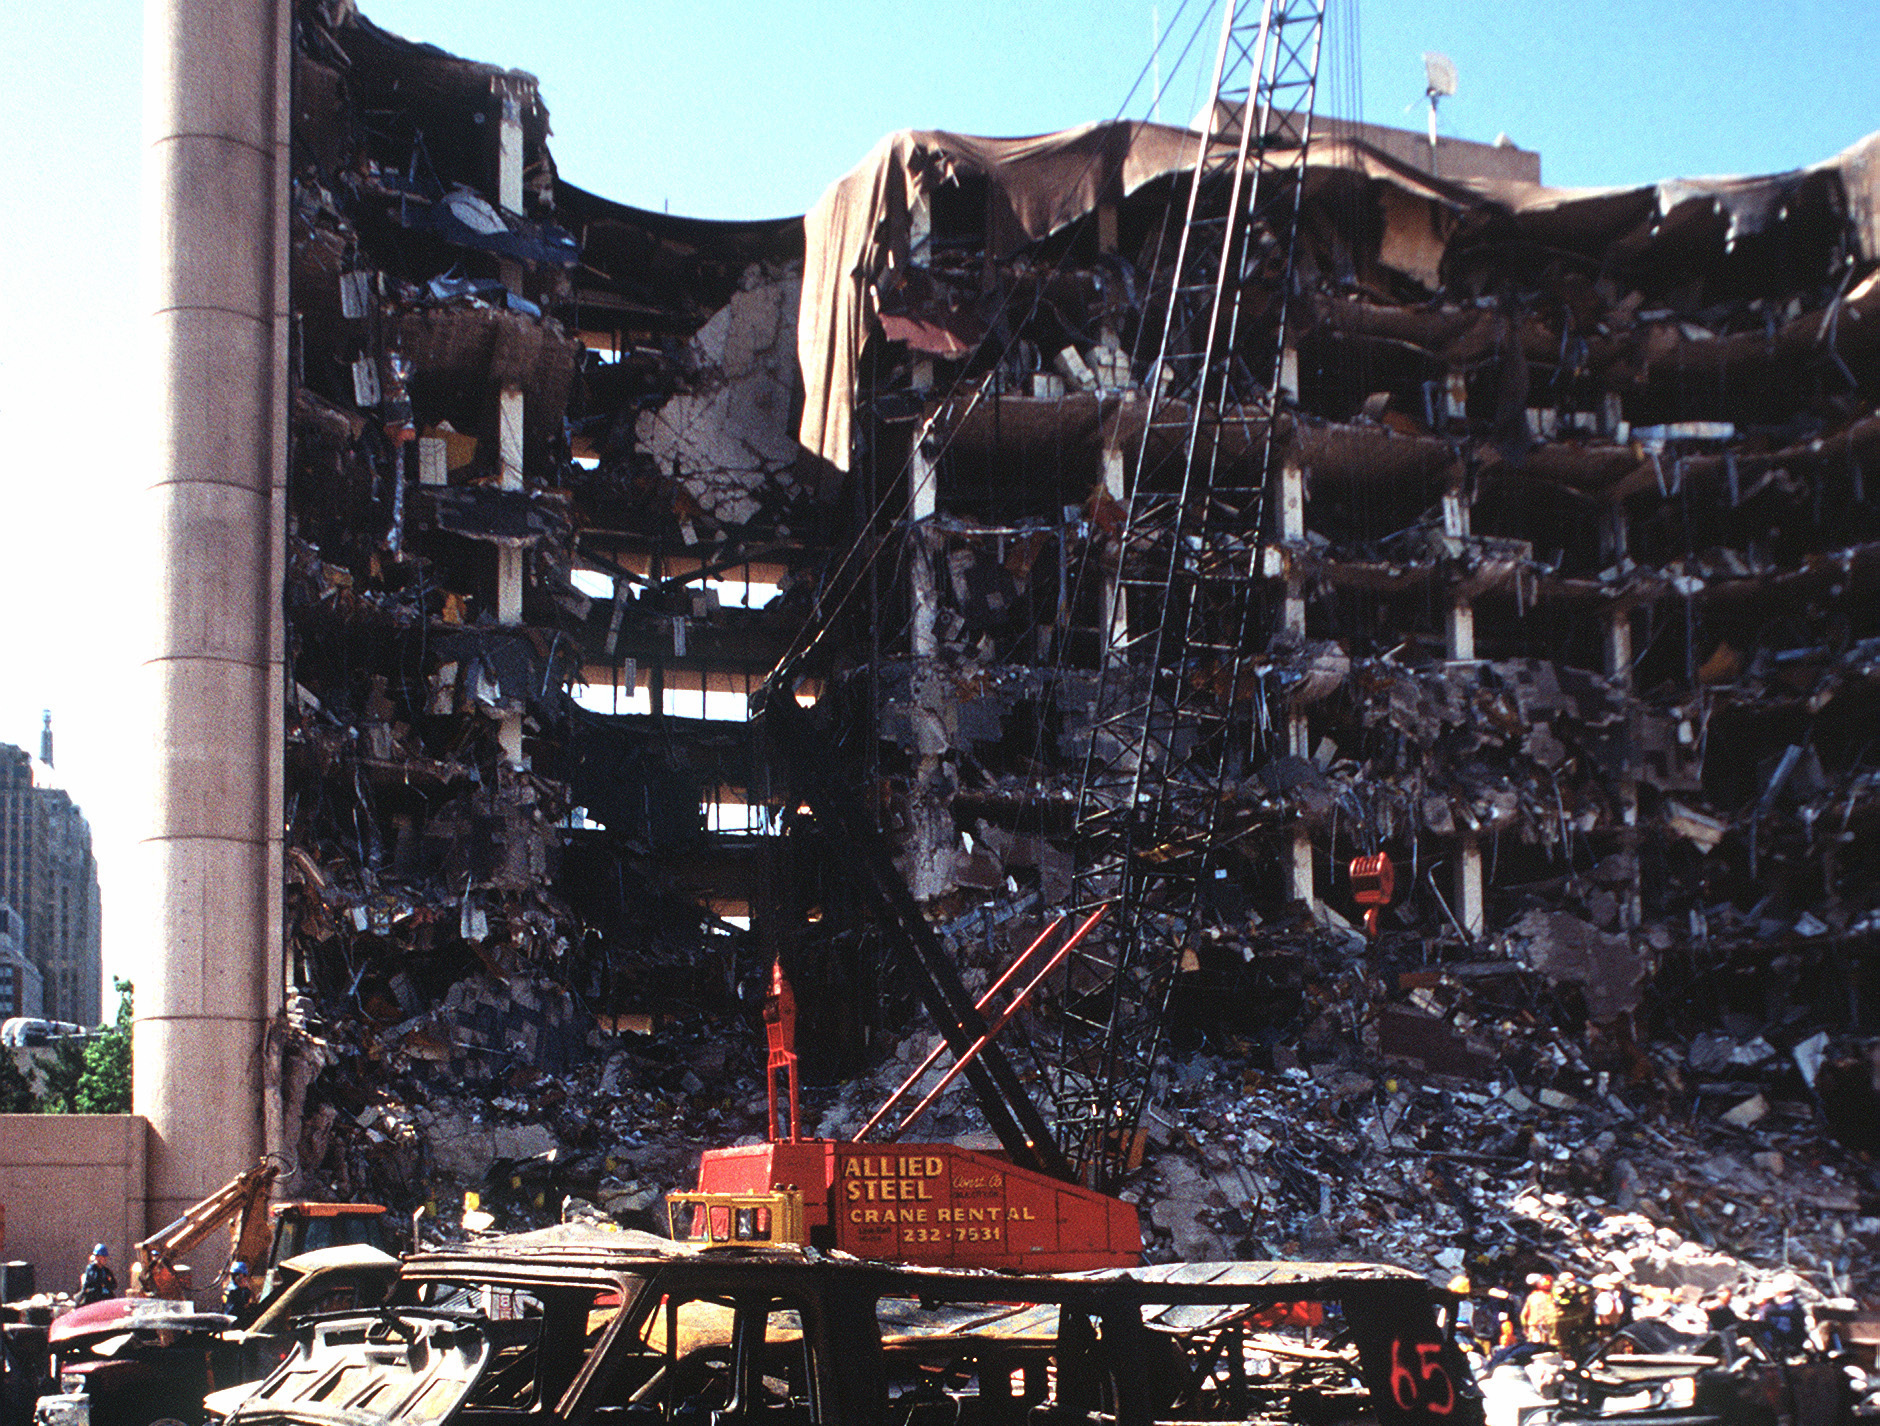 The devastated facade of the Alfred P. Murrah Federal Building in Oklahoma City after Timothy McVeigh's bombing. A burnt out van and a red rescue crane are in the foreground.